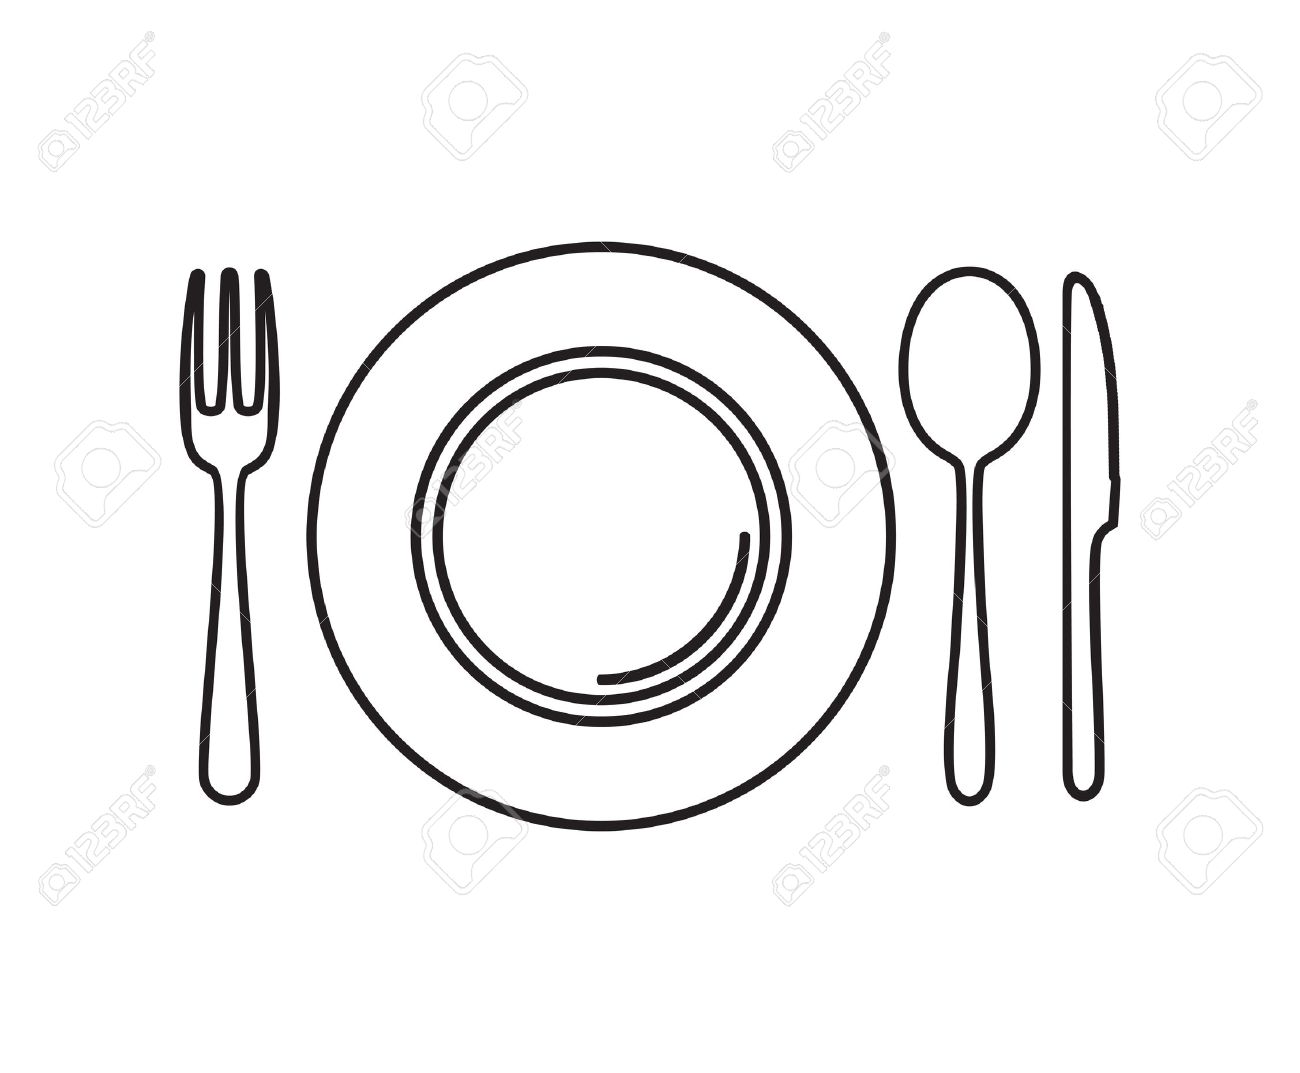 Plate spoon fork clipart